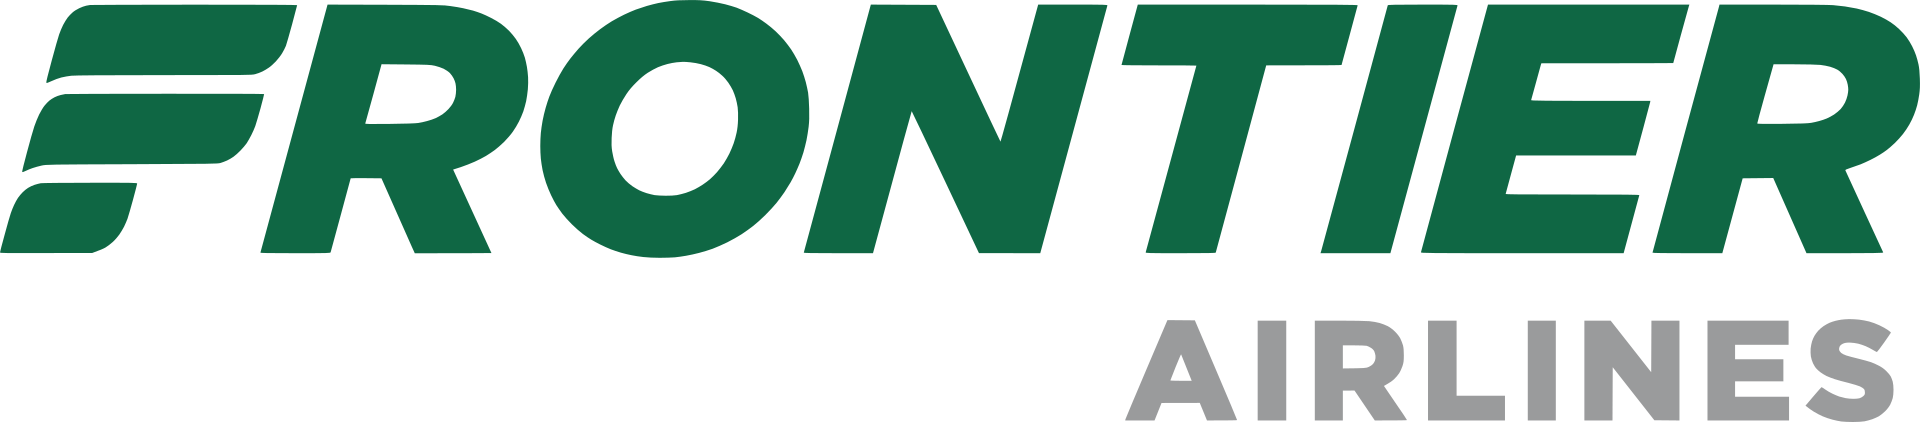 Frontier Airlines, Inc. logo